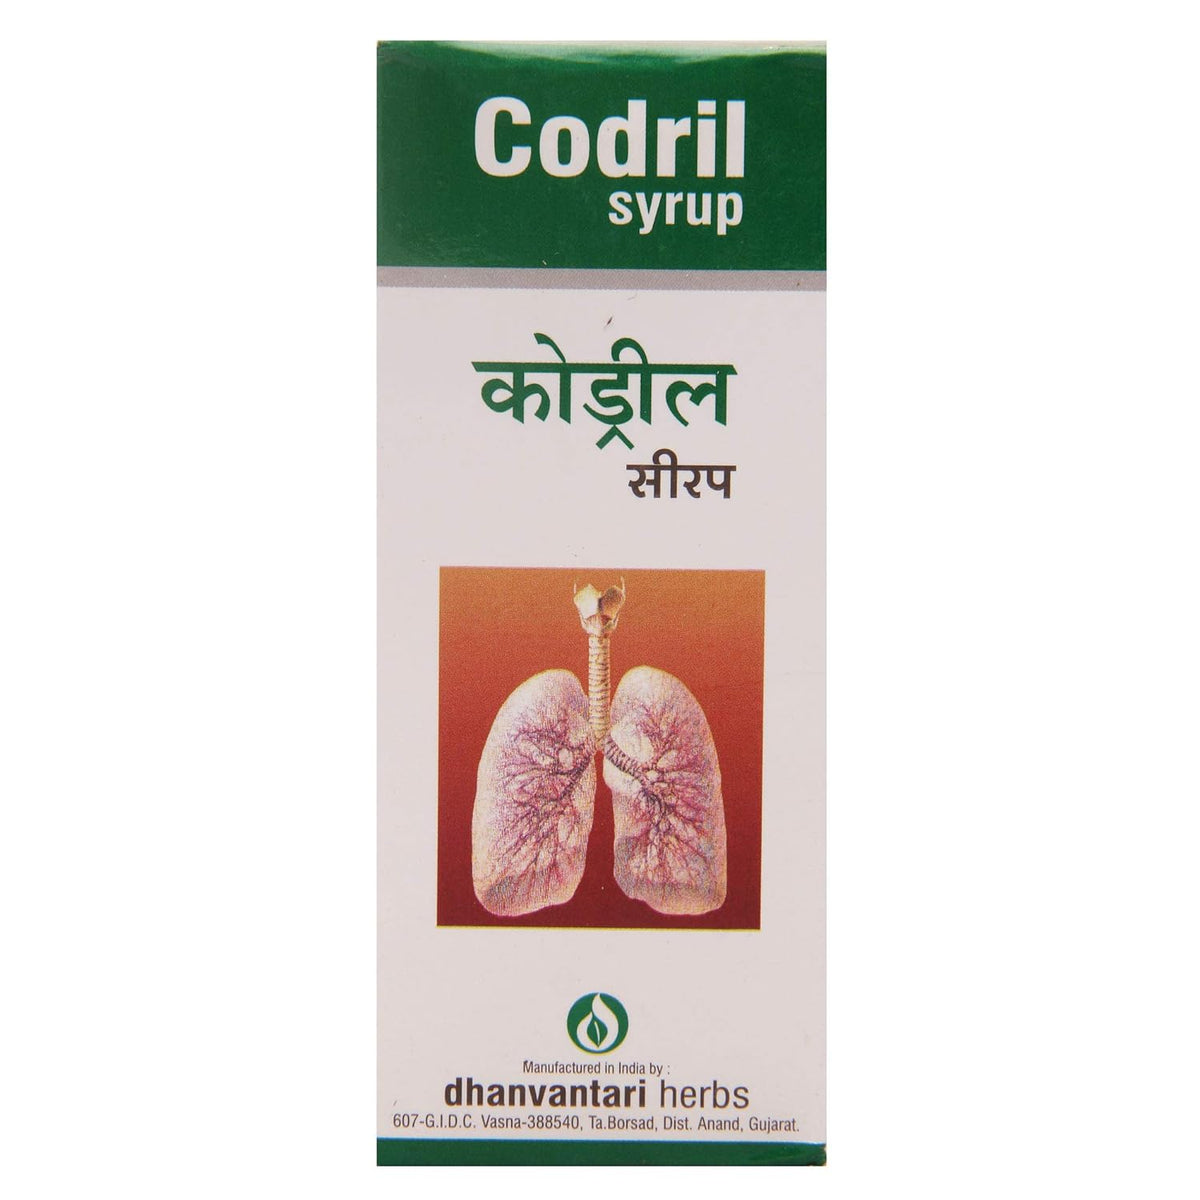 Dhanvantari Ayurvedic Codril Useful In Cough,Cold,Sore Throat & Chest Congestion Syrup